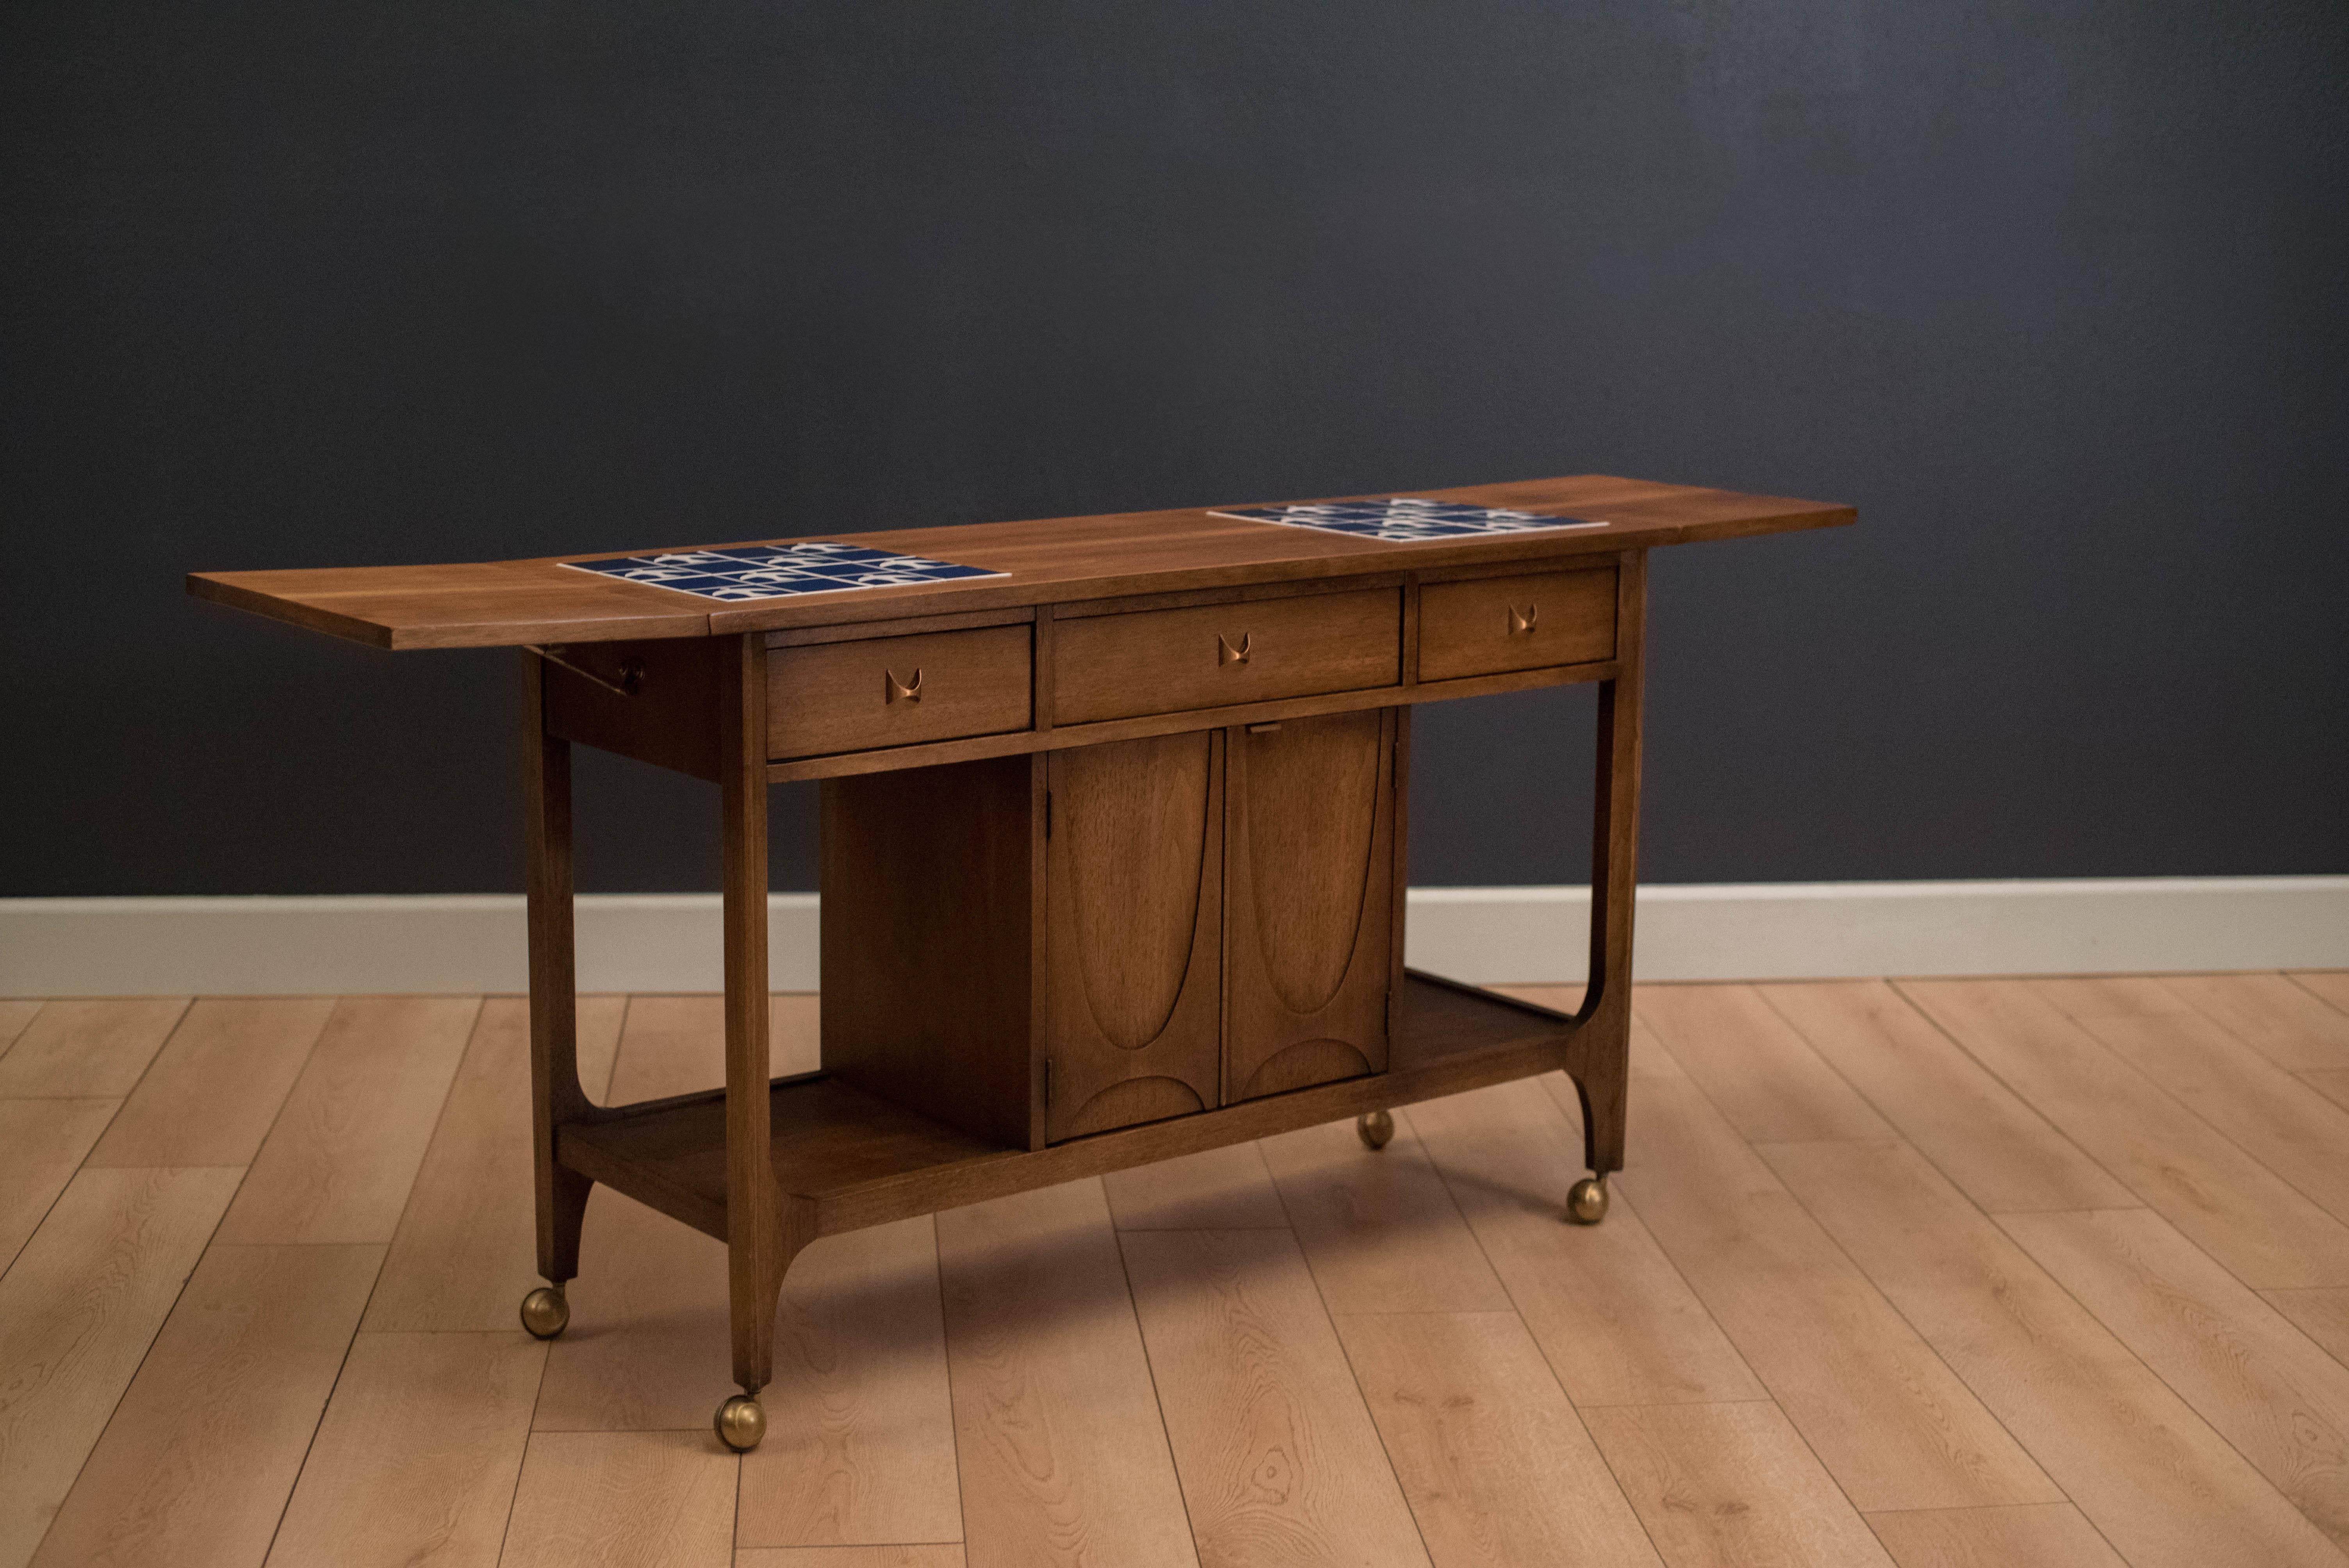 Vintage Brasilia bar cart manufactured by Broyhill Furniture Co. in walnut. This piece includes three drawers and a middle cabinet offering plenty of storage. Drop leaves extend to increase the work surface area and features the line's signature